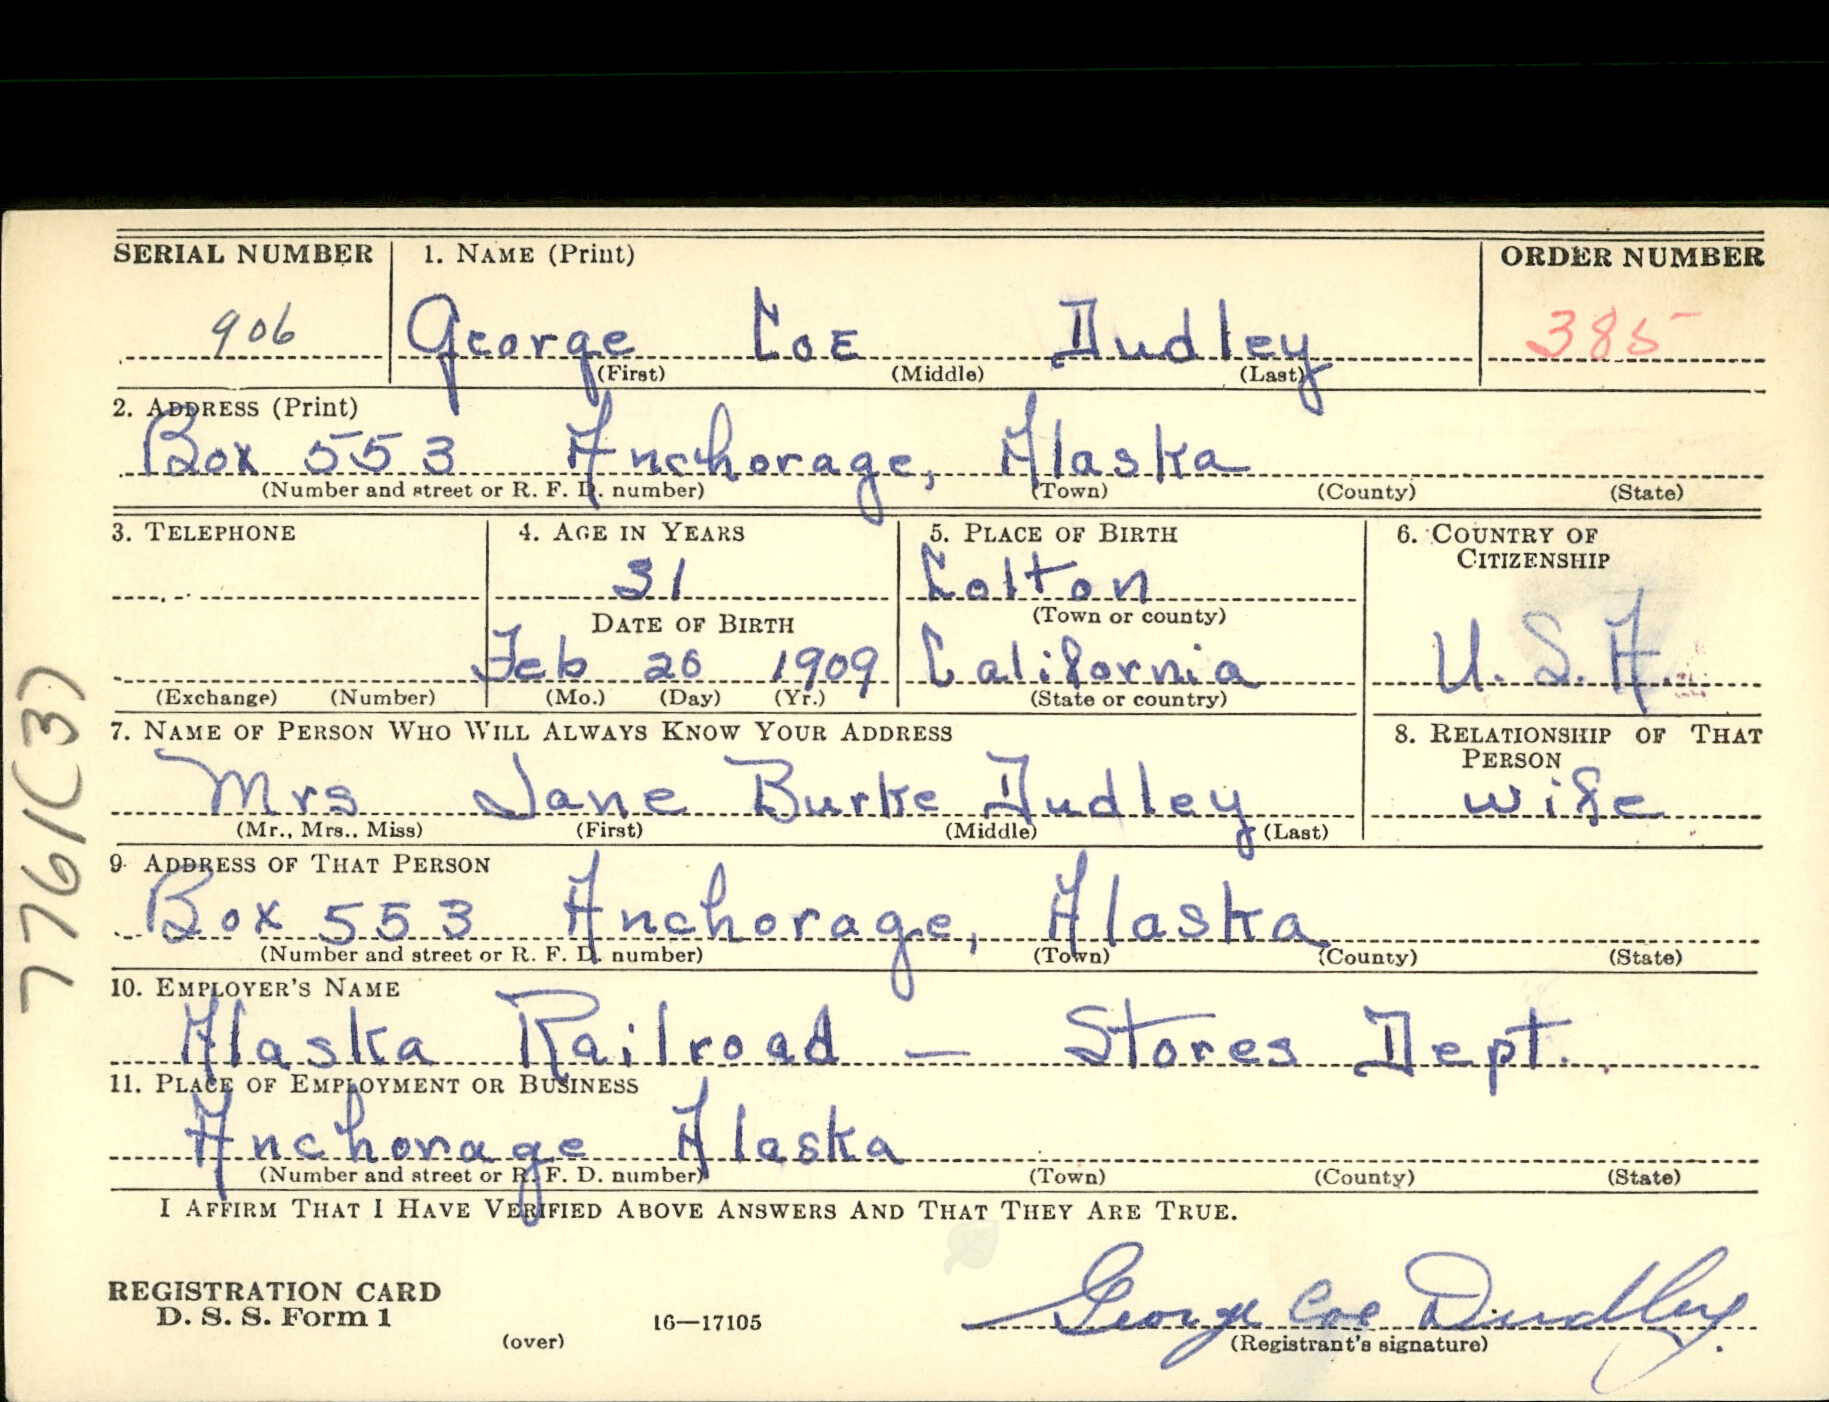 The front of George Coe Dudley’s 1941 draft-registration card bears his signature and shows him as a resident of Anchorage. By the 1950s, he was living on the Kenai Peninsula.